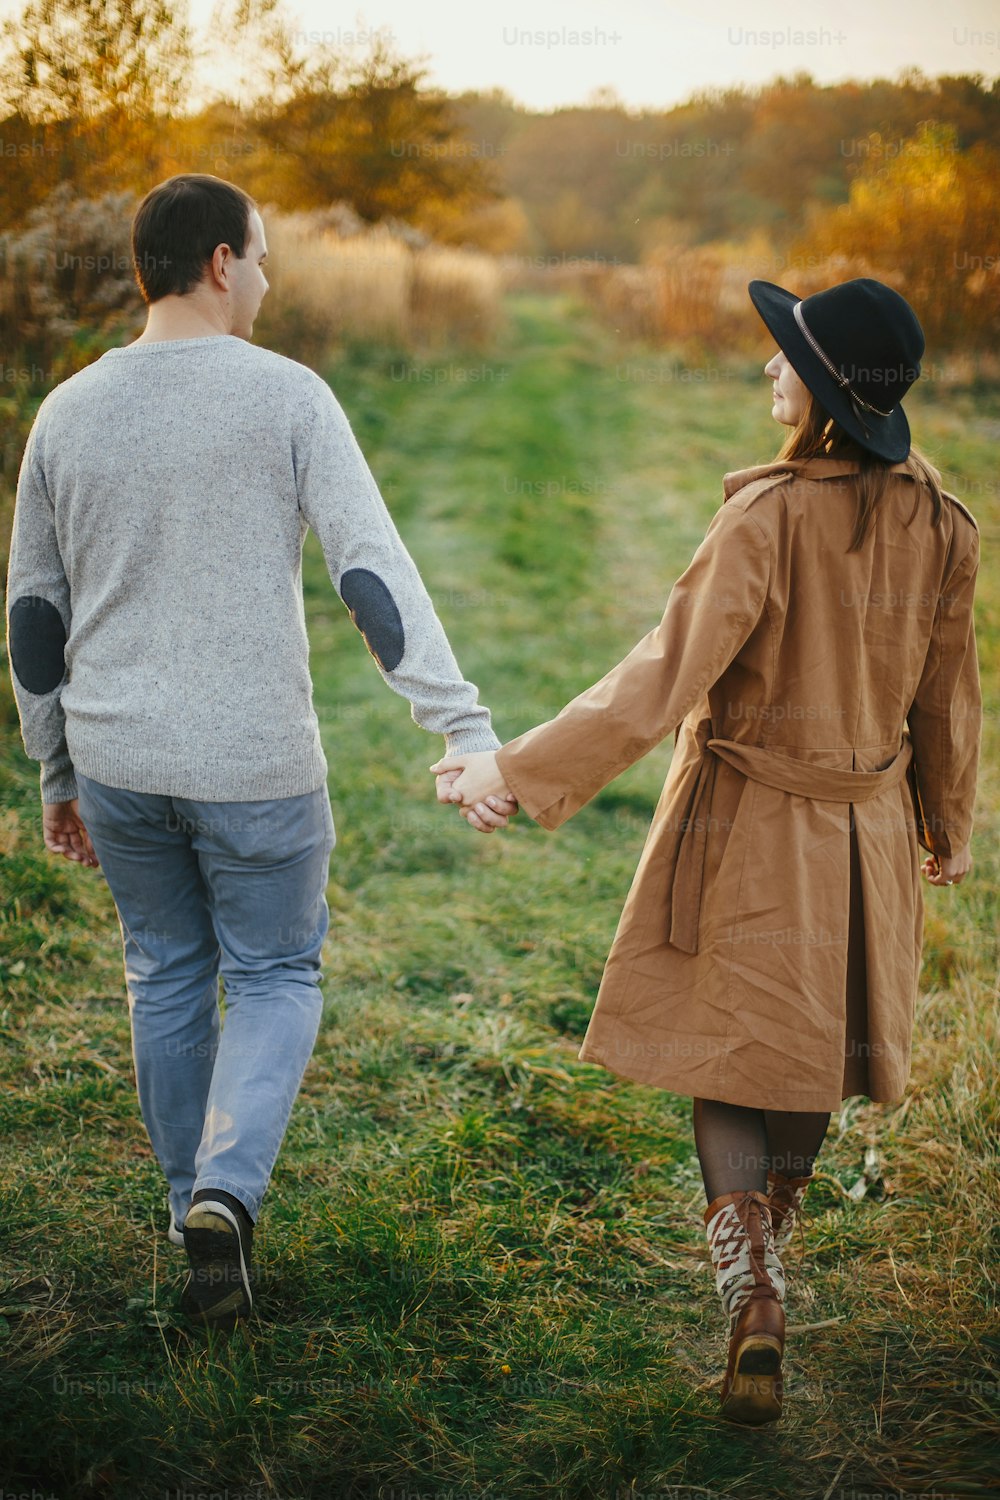 Happy stylish couple walking holding hands in autumn meadow in warm sunset light. Romantic sensual moment. Young fashionable woman and man relaxing in autumn field